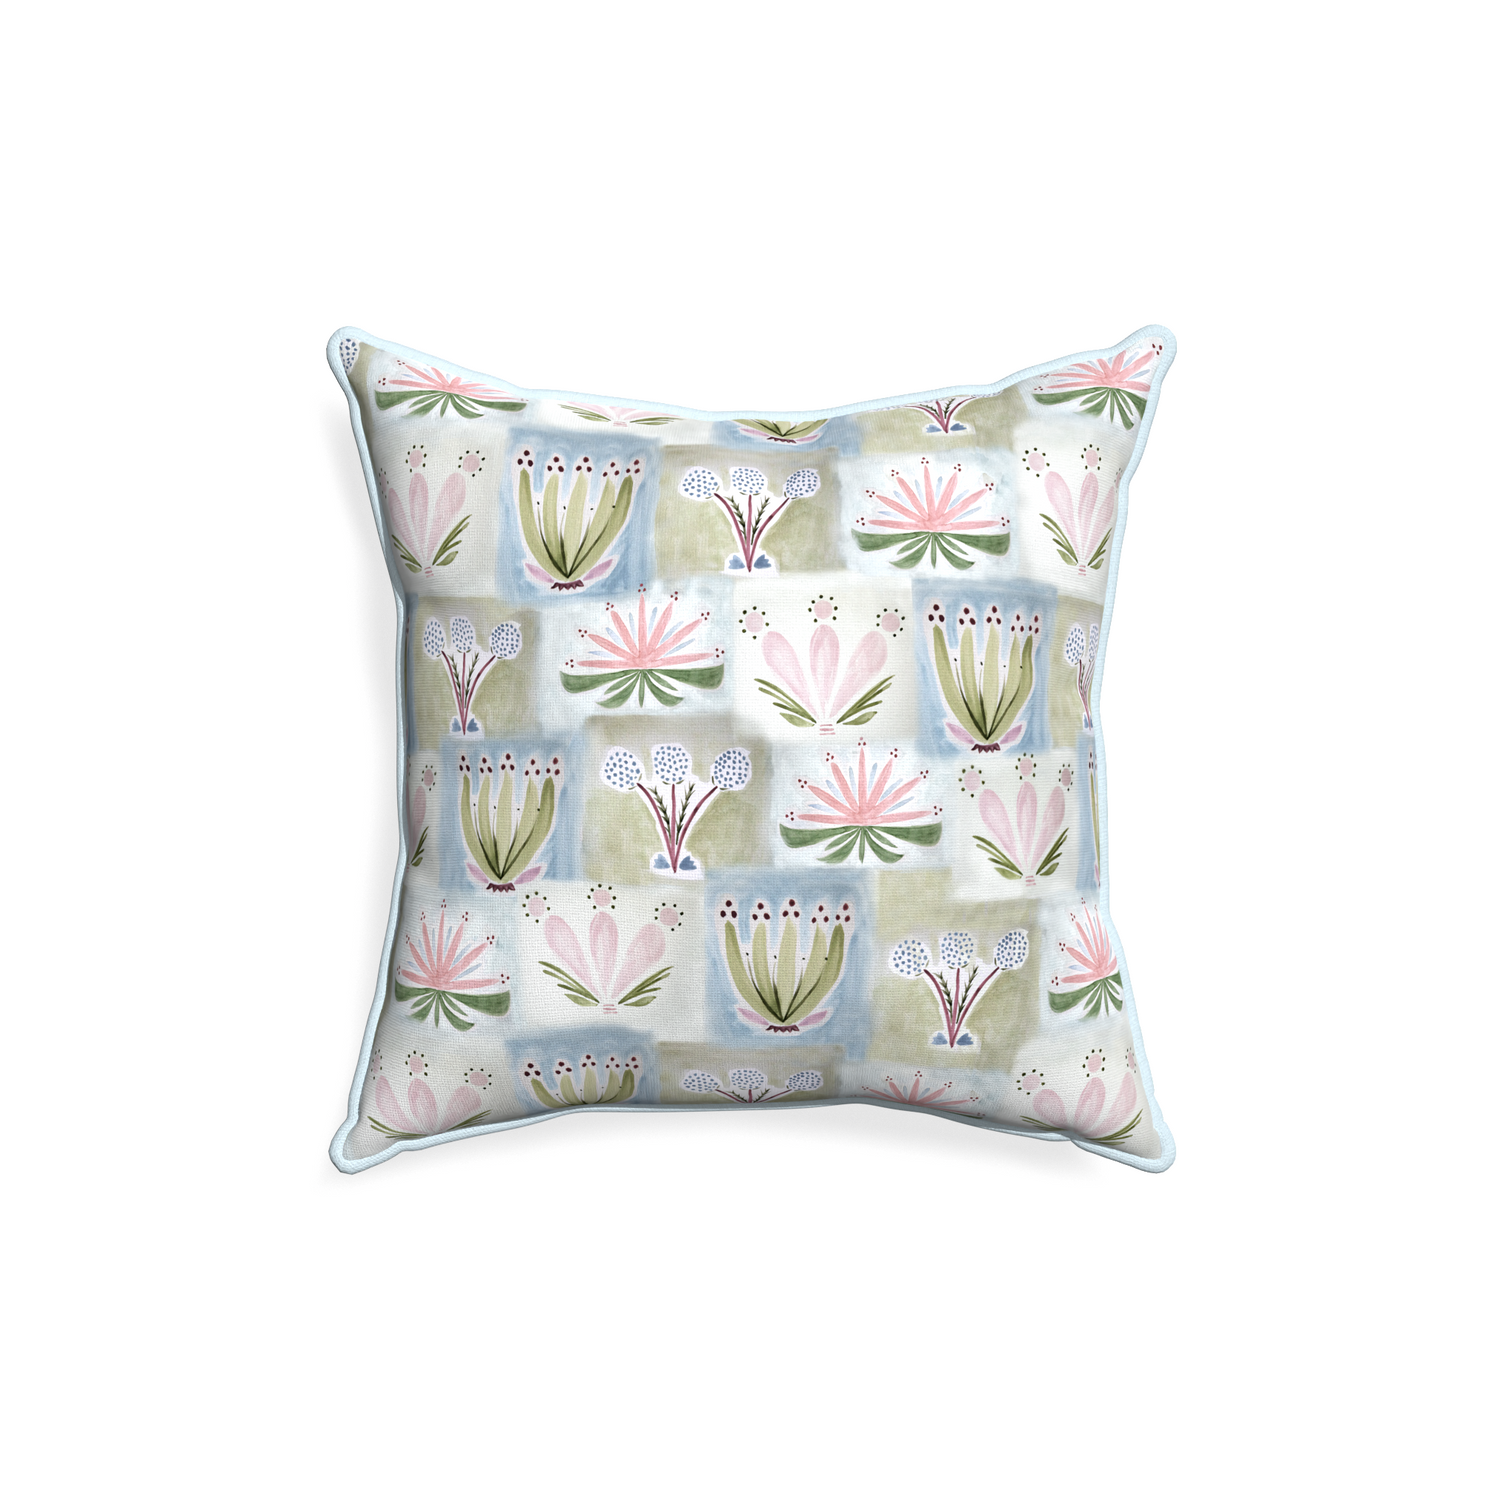 18-square harper custom hand-painted floralpillow with powder piping on white background